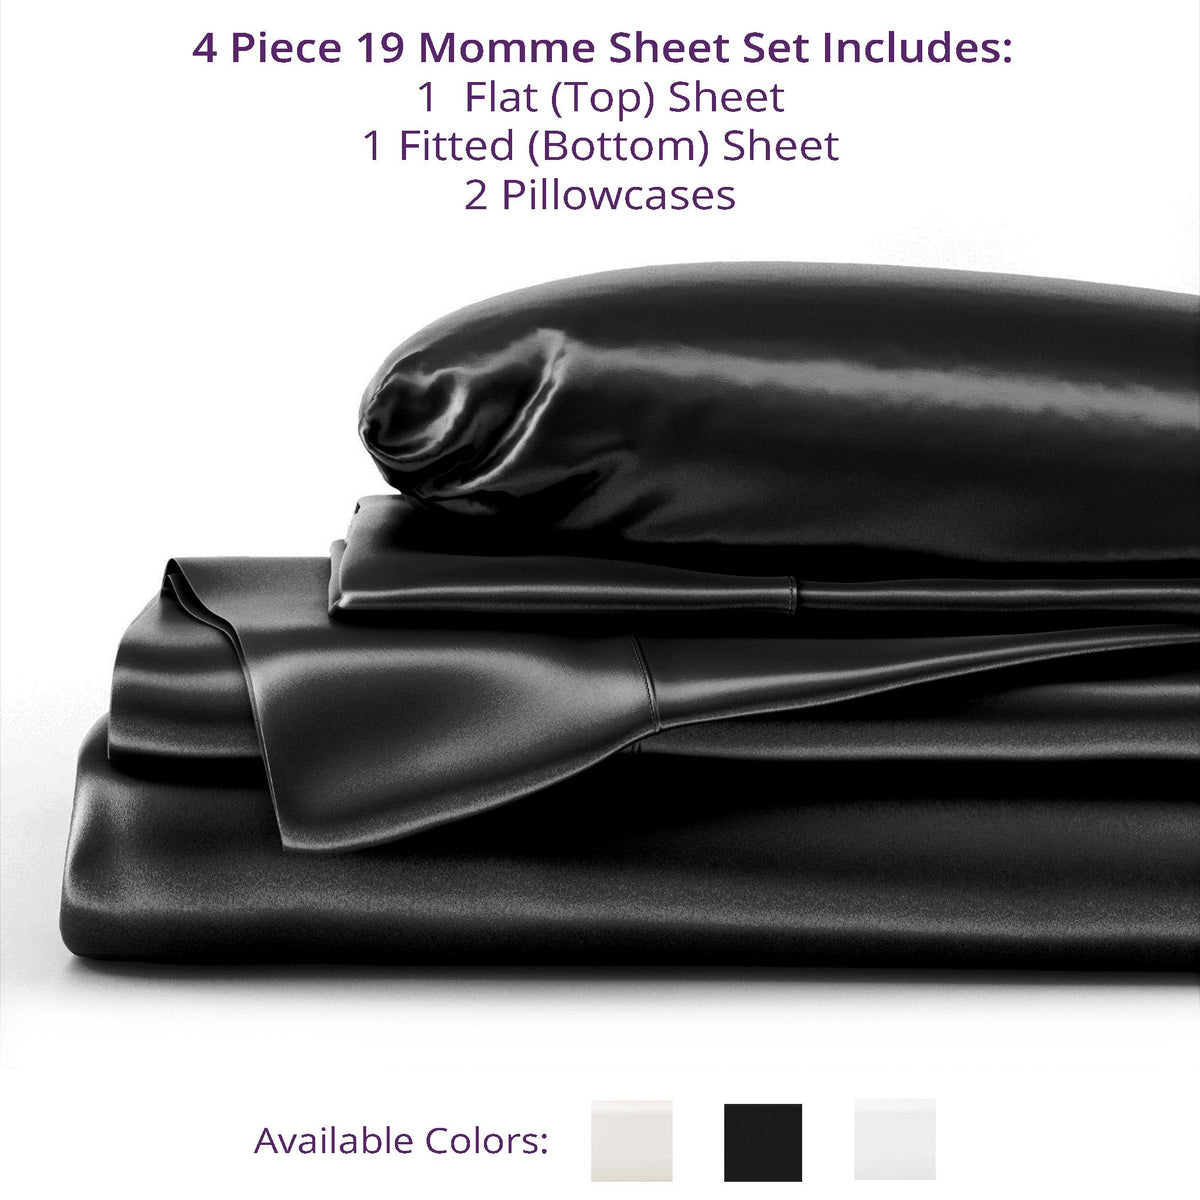 MPS Included in Sheet Set 19 Momme Black